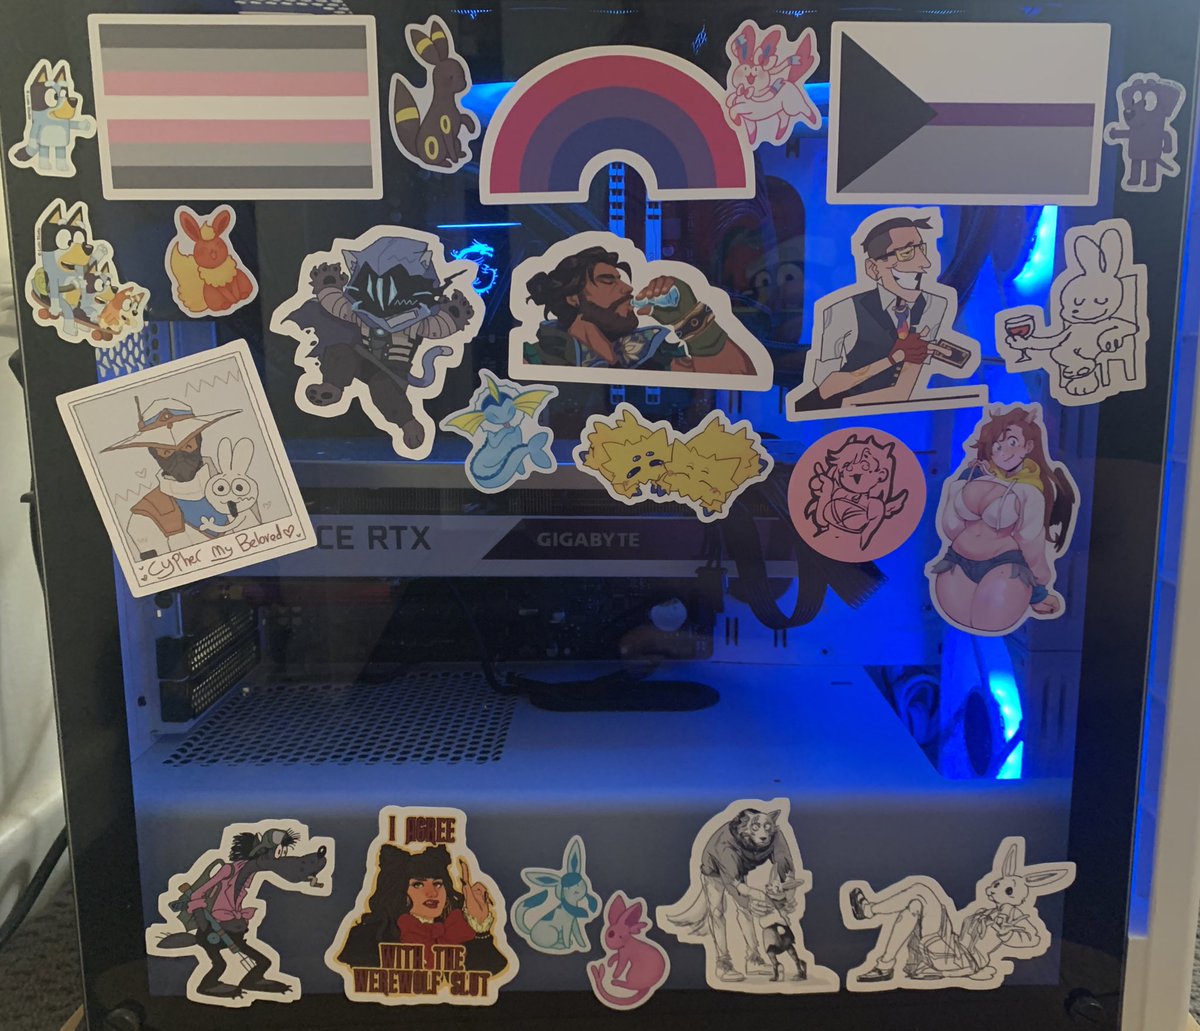 It's time for a random: look at my stickers!!
Moment..

I love love my computer case, that's why I specifically wanted to make sure the new desk I get will fit this on it…
So I can look at it more often

Few are my art,
A few are from my friends!!
I love stickers… 